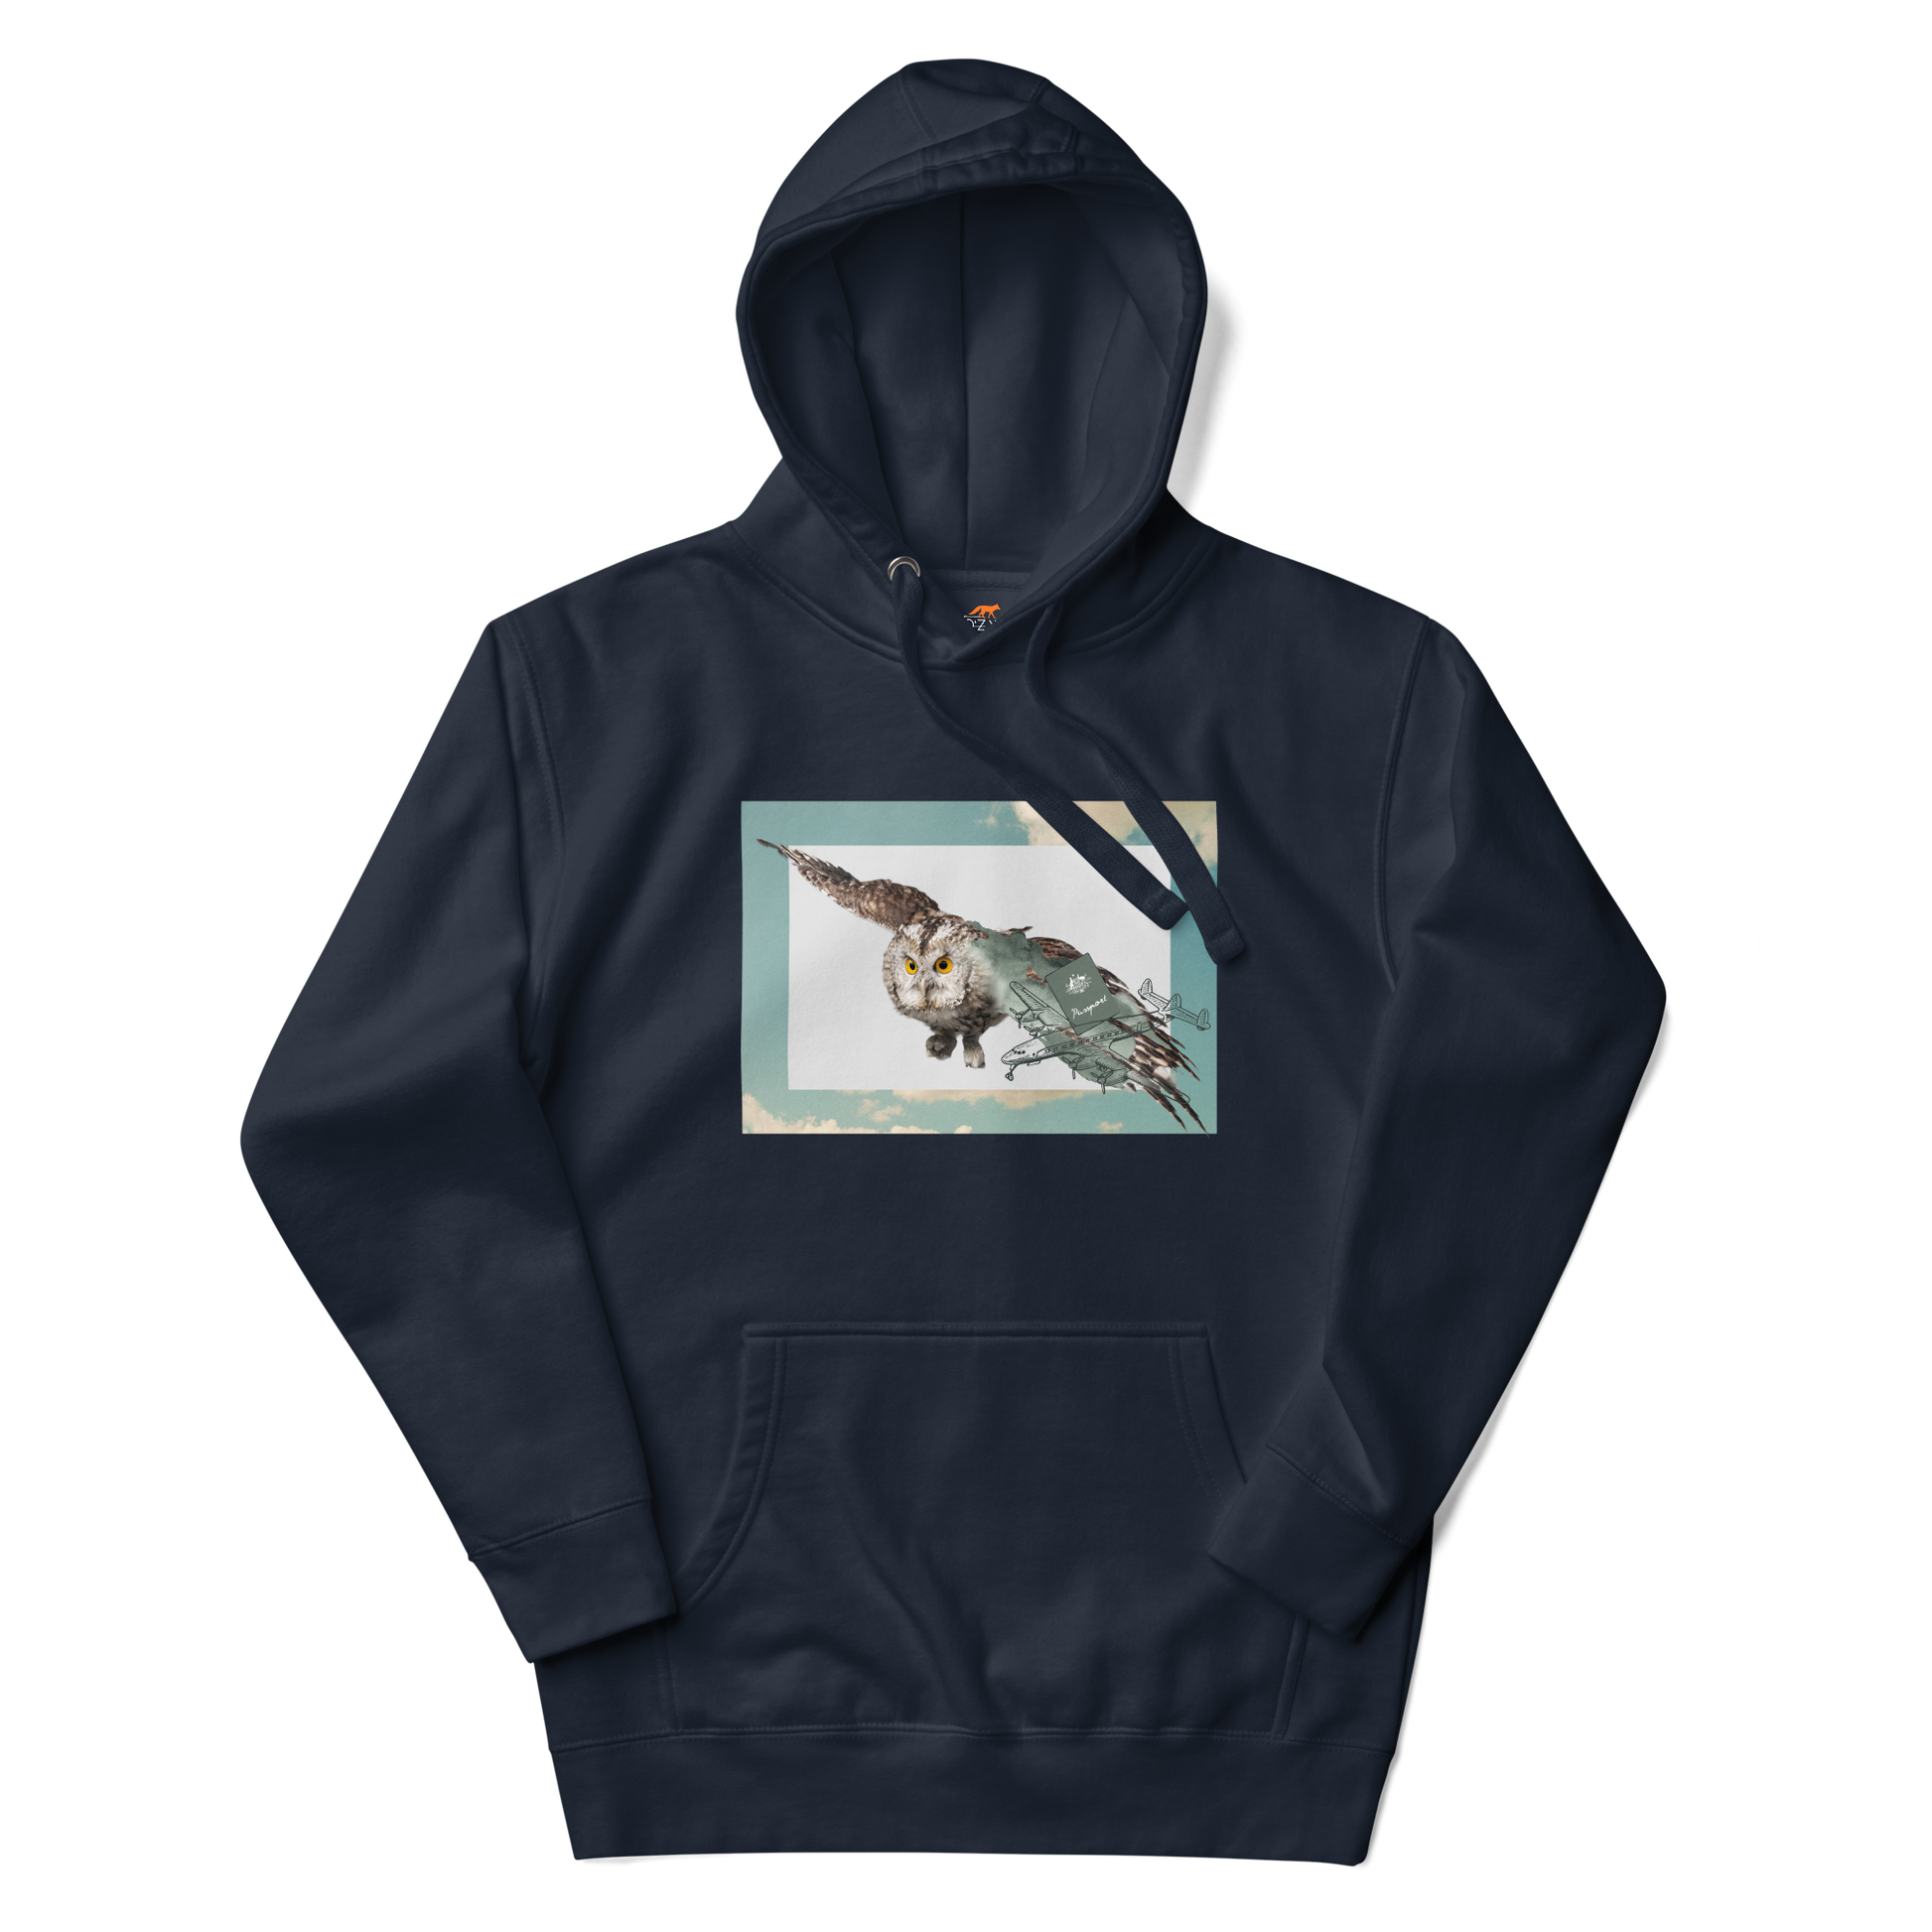 Navy Blazer Premium Owl Hoodie featuring a cool Flying Owl graphic on the chest - Cool Graphic Owl Hoodies - Boozy Fox